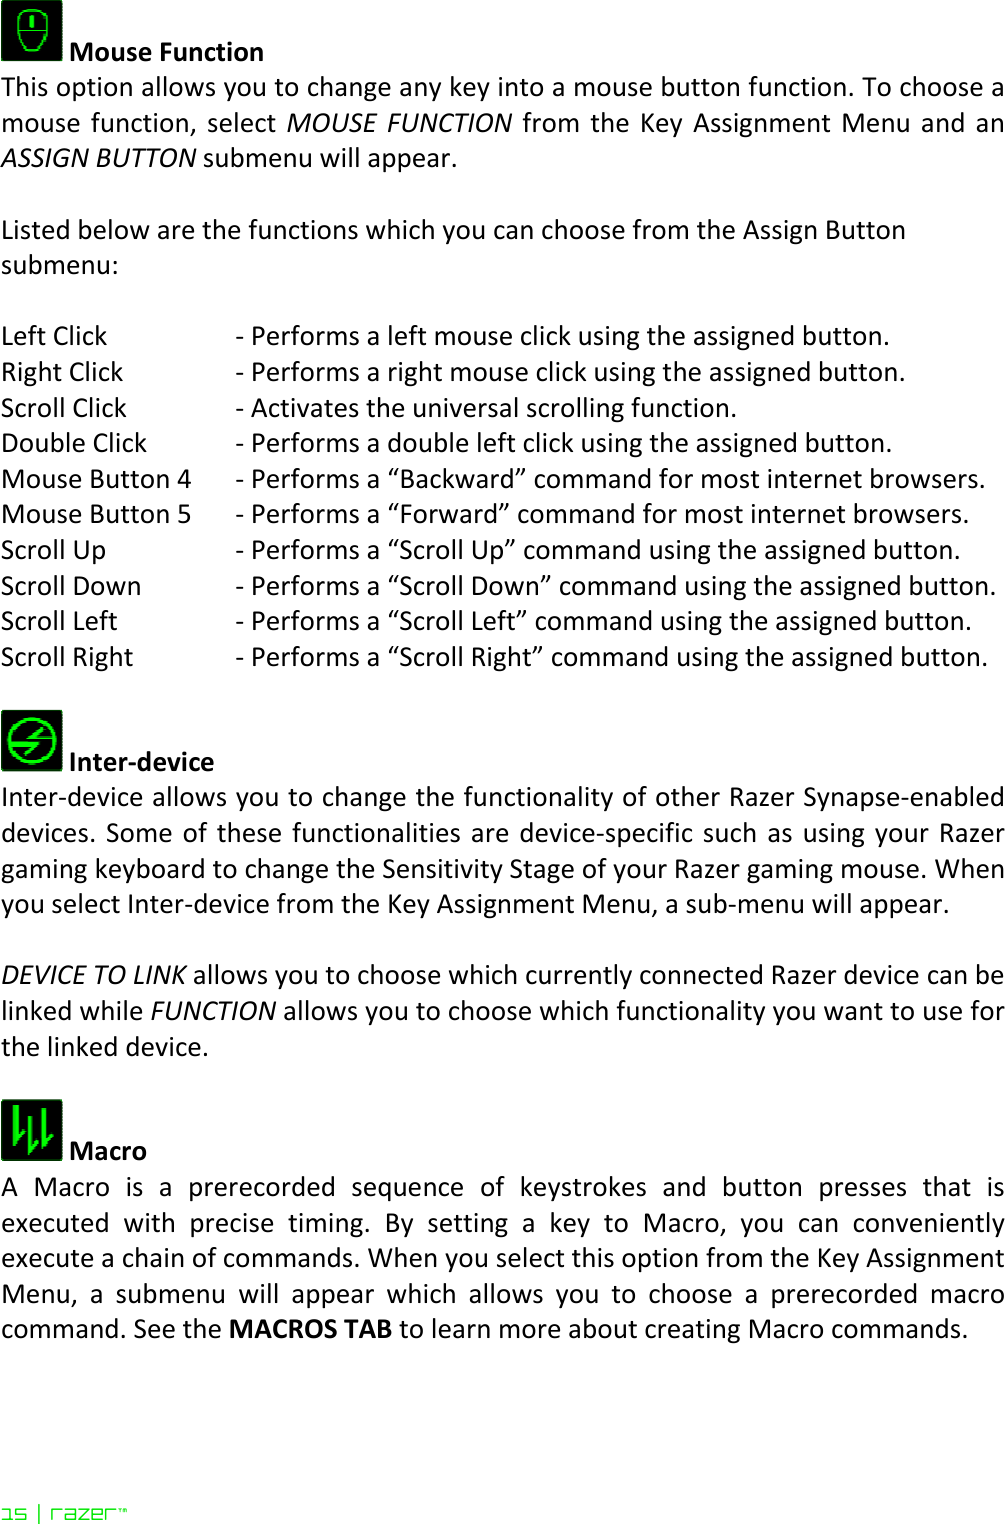 15 | razer™   Mouse Function This option allows you to change any key into a mouse button function. To choose a mouse  function, select  MOUSE  FUNCTION from  the  Key  Assignment Menu and  an ASSIGN BUTTON submenu will appear.  Listed below are the functions which you can choose from the Assign Button submenu:  Left Click   - Performs a left mouse click using the assigned button.  Right Click   - Performs a right mouse click using the assigned button.  Scroll Click  - Activates the universal scrolling function. Double Click   - Performs a double left click using the assigned button. Mouse Button 4  - Performs a “Backward” command for most internet browsers. Mouse Button 5  - Performs a “Forward” command for most internet browsers. Scroll Up  - Performs a “Scroll Up” command using the assigned button. Scroll Down  - Performs a “Scroll Down” command using the assigned button. Scroll Left              - Performs a “Scroll Left” command using the assigned button. Scroll Right            - Performs a “Scroll Right” command using the assigned button.   Inter-device Inter-device allows you to change the functionality of other Razer Synapse-enabled devices. Some of  these functionalities are device-specific such as  using your  Razer gaming keyboard to change the Sensitivity Stage of your Razer gaming mouse. When you select Inter-device from the Key Assignment Menu, a sub-menu will appear.   DEVICE TO LINK allows you to choose which currently connected Razer device can be linked while FUNCTION allows you to choose which functionality you want to use for the linked device.   Macro A  Macro  is  a  prerecorded  sequence  of  keystrokes  and  button  presses  that  is executed  with  precise  timing.  By  setting  a  key  to  Macro,  you  can  conveniently execute a chain of commands. When you select this option from the Key Assignment Menu,  a  submenu  will  appear  which  allows  you  to  choose  a  prerecorded  macro command. See the MACROS TAB to learn more about creating Macro commands.  